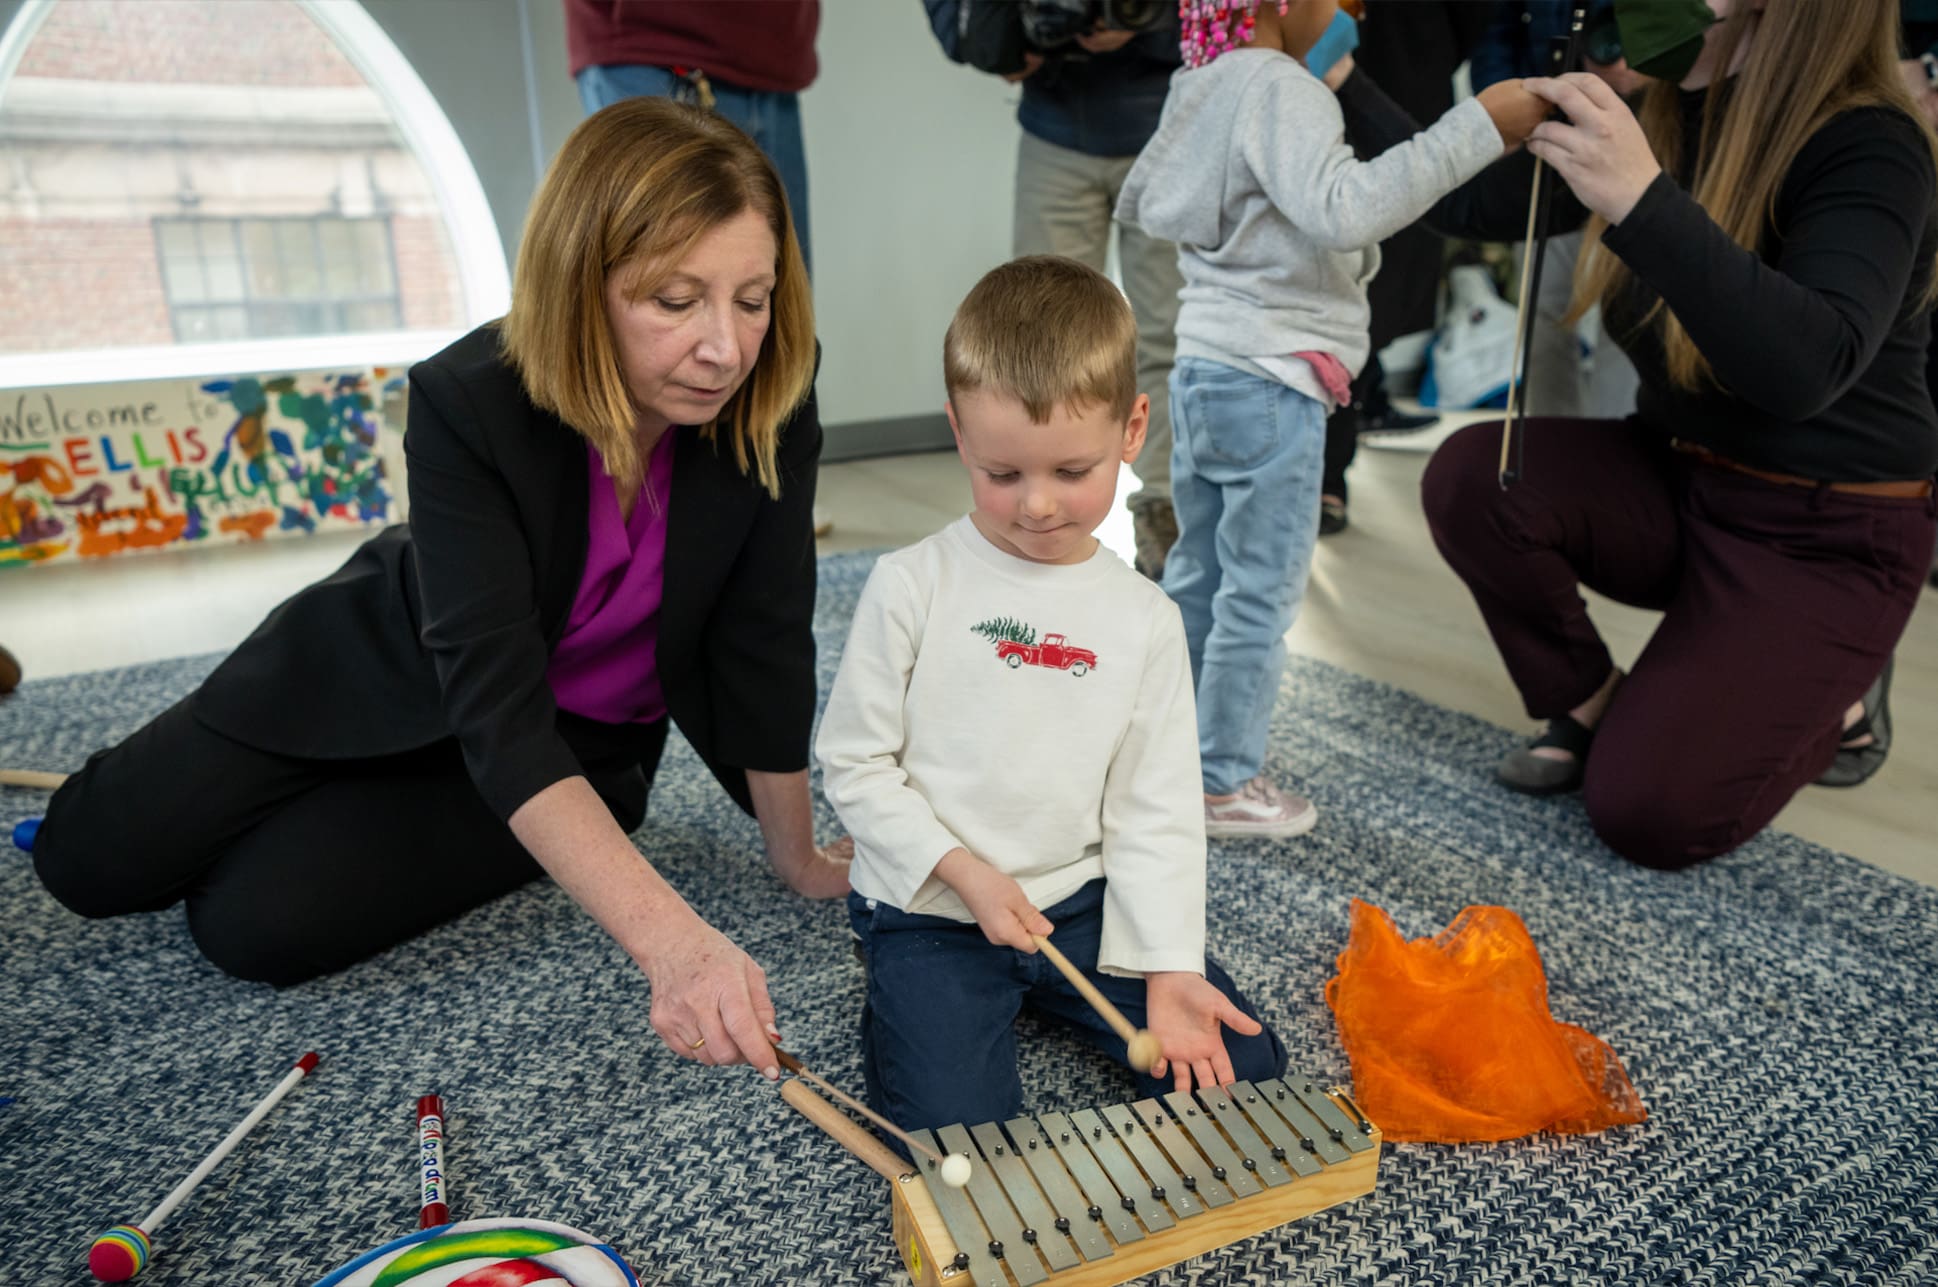 NEC President Andrea Kalyn and a child playing a mallet instrument.